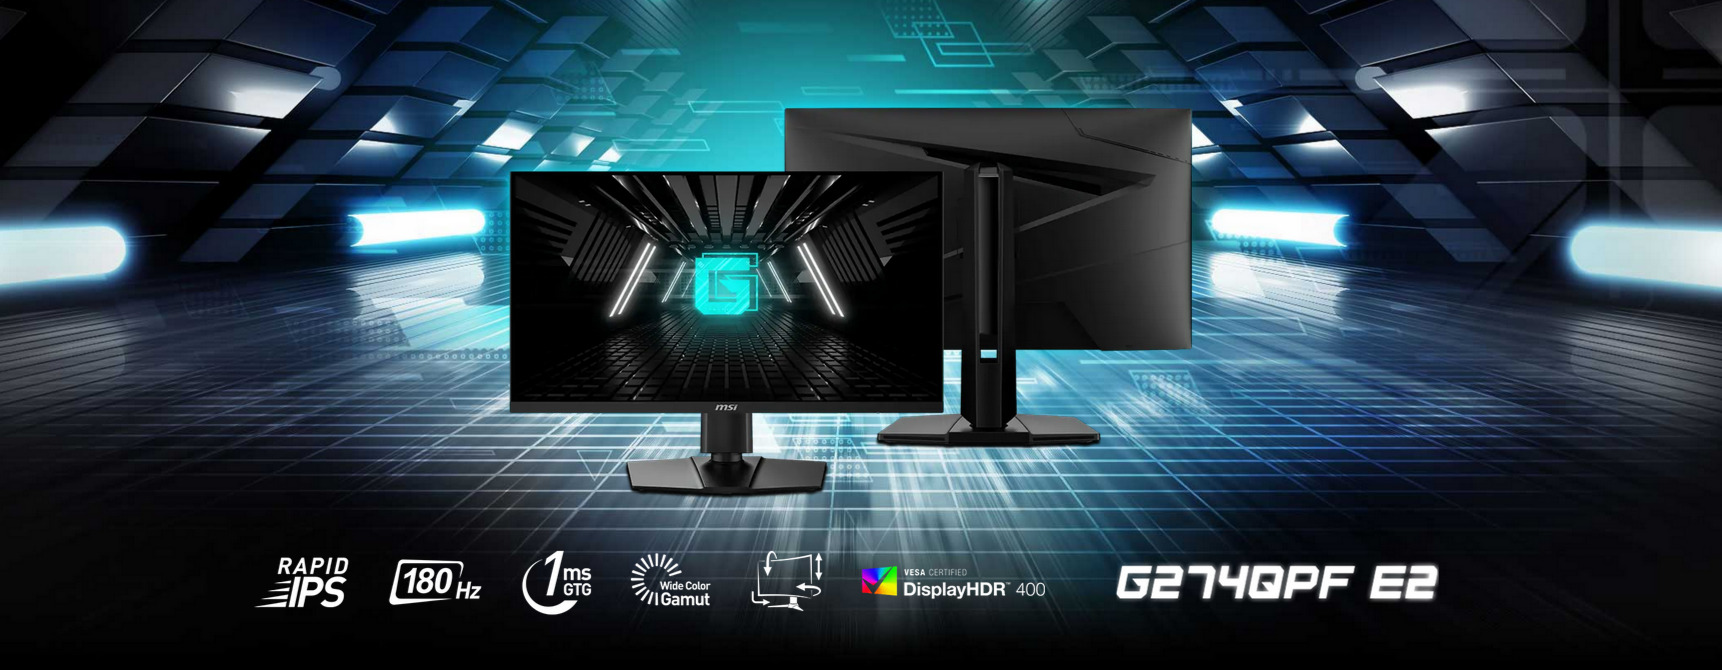 A large marketing image providing additional information about the product MSI G274QPF-E2 27" WQHD 180Hz IPS Monitor - Additional alt info not provided